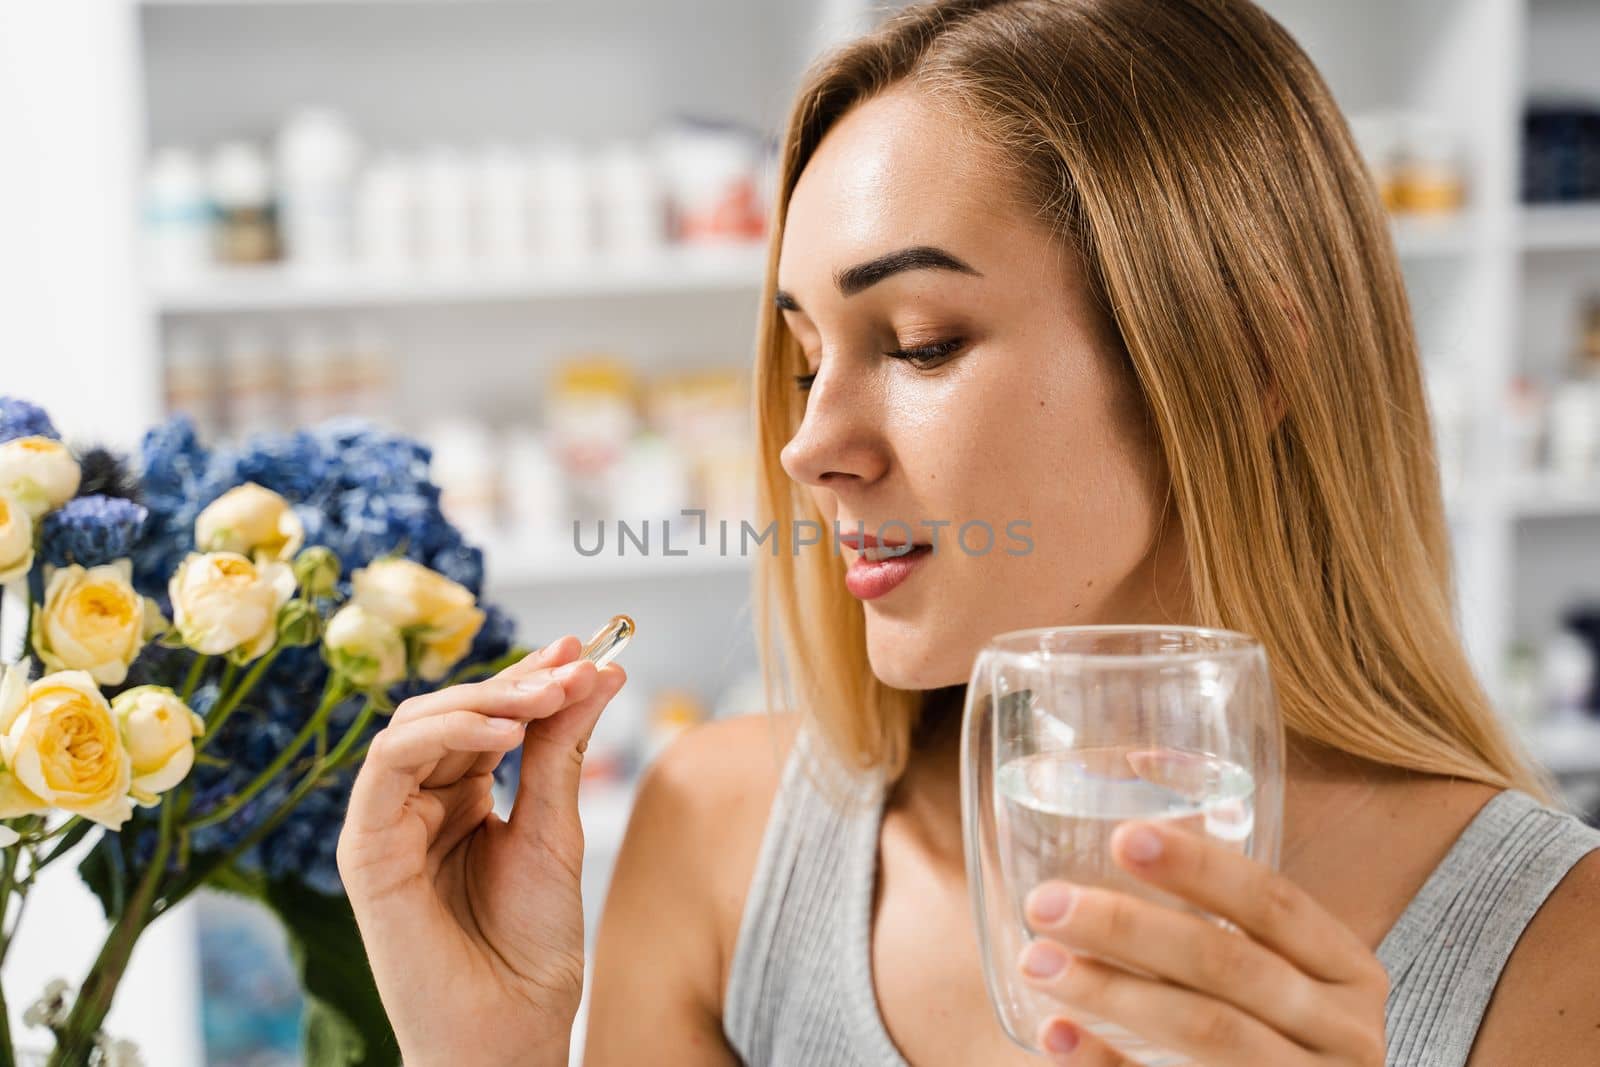 Girl with Omega-3 capsule and cup of water is ready to take a BADS capsule of Omega-3. Biologically active dietary supplements. Taking vitamin D for building and maintaining healthy bones